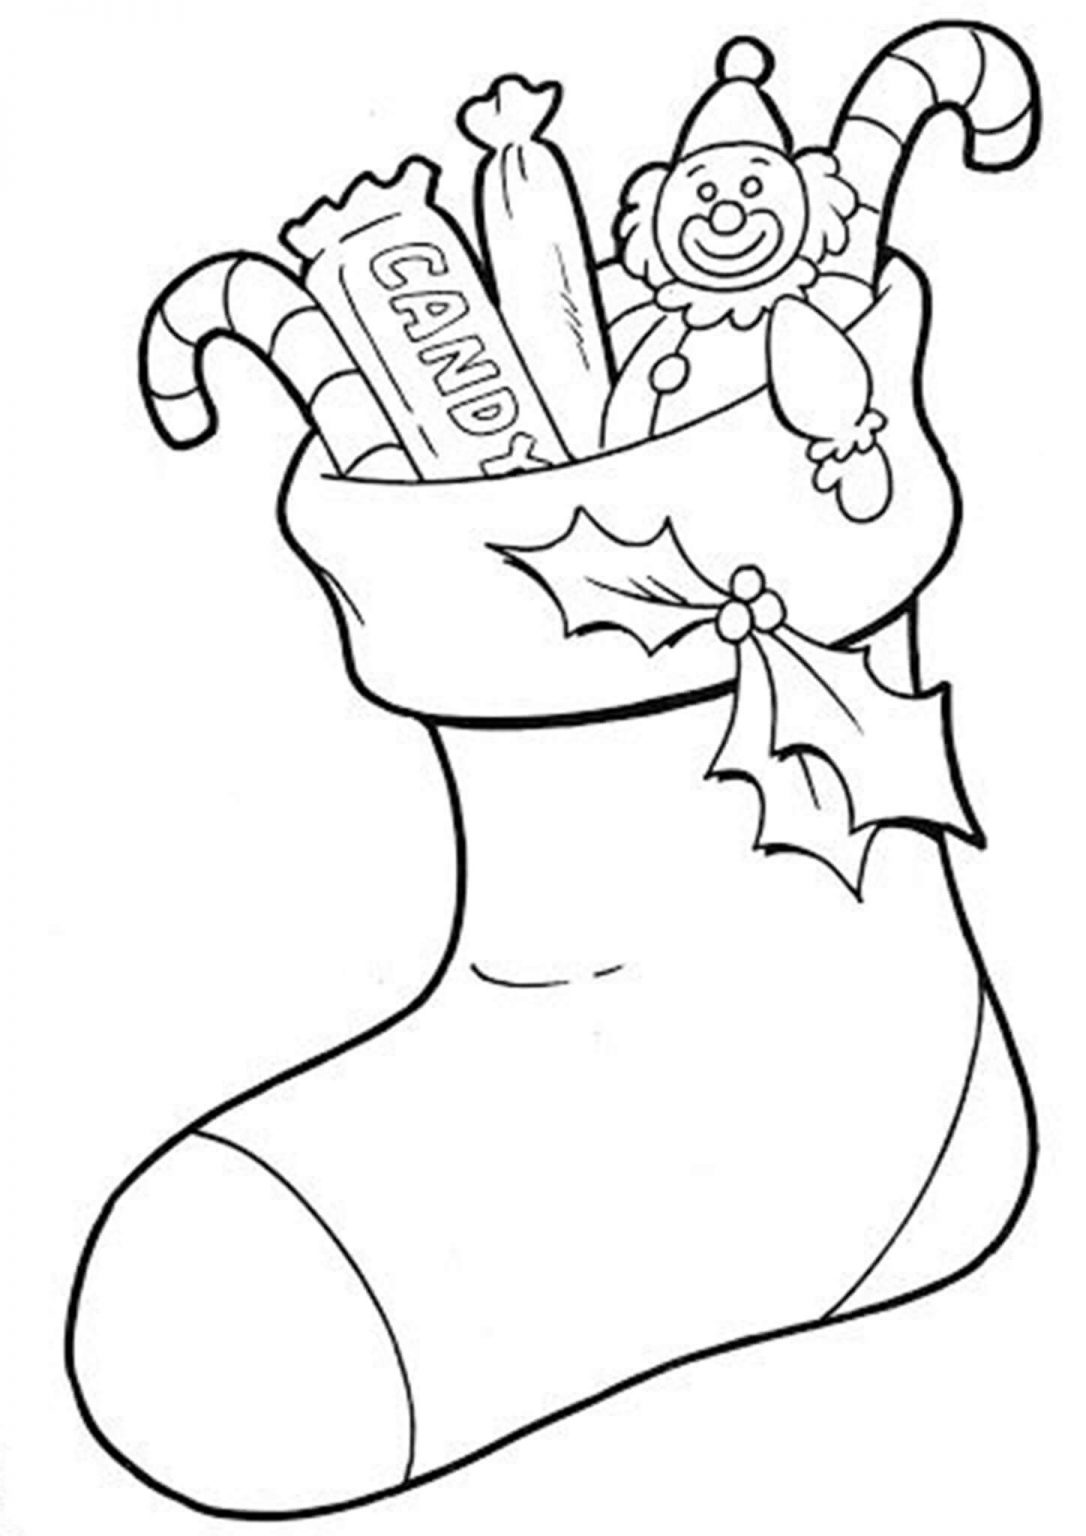 Christmas Stocking Coloring Pages For Kids Tulamama